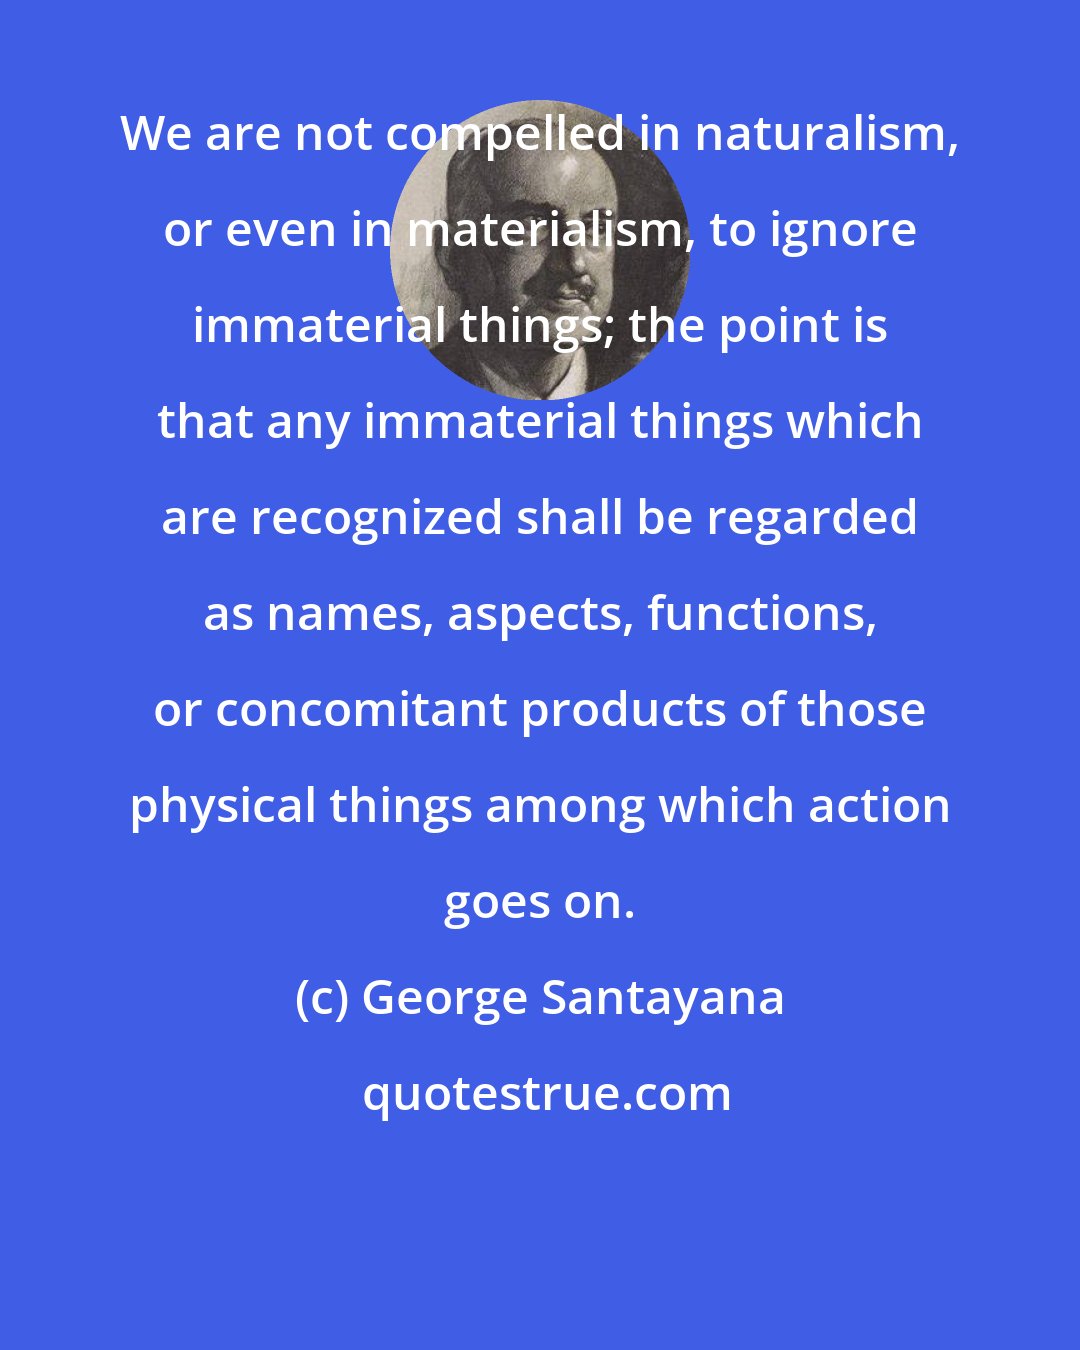 George Santayana: We are not compelled in naturalism, or even in materialism, to ignore immaterial things; the point is that any immaterial things which are recognized shall be regarded as names, aspects, functions, or concomitant products of those physical things among which action goes on.